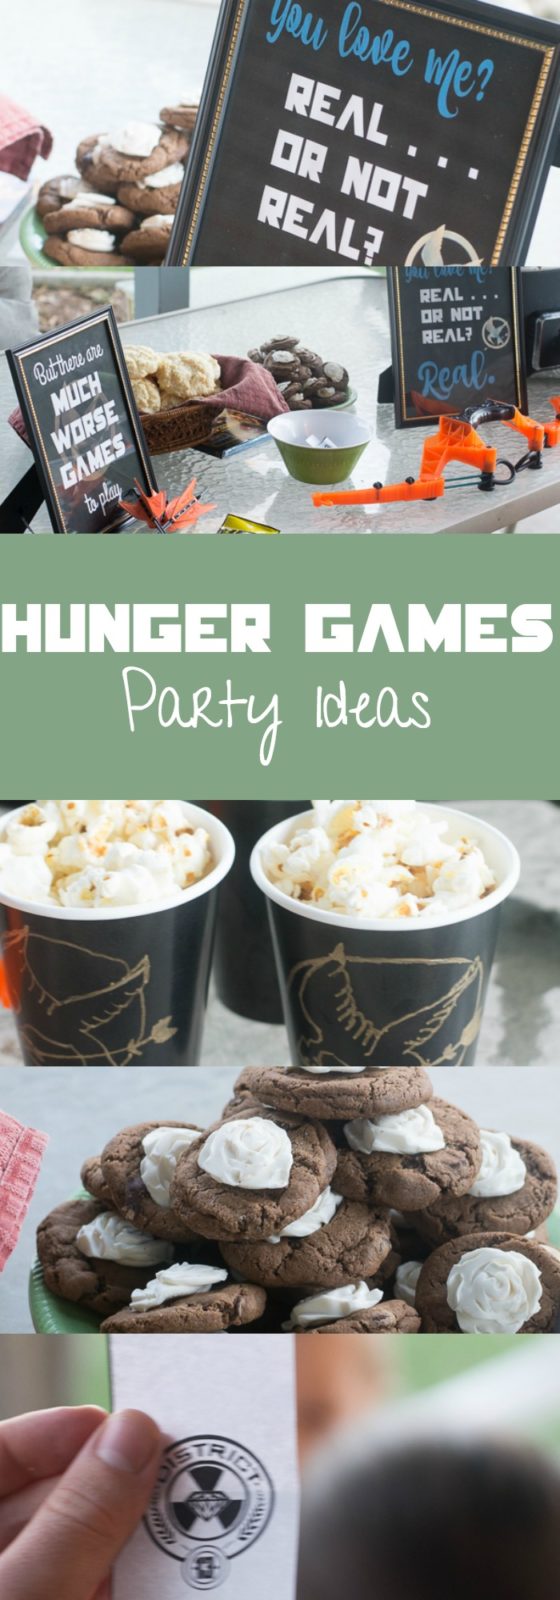 Lots of fun Hunger Games party ideas - Hunger Game's themed food, decor, and games!